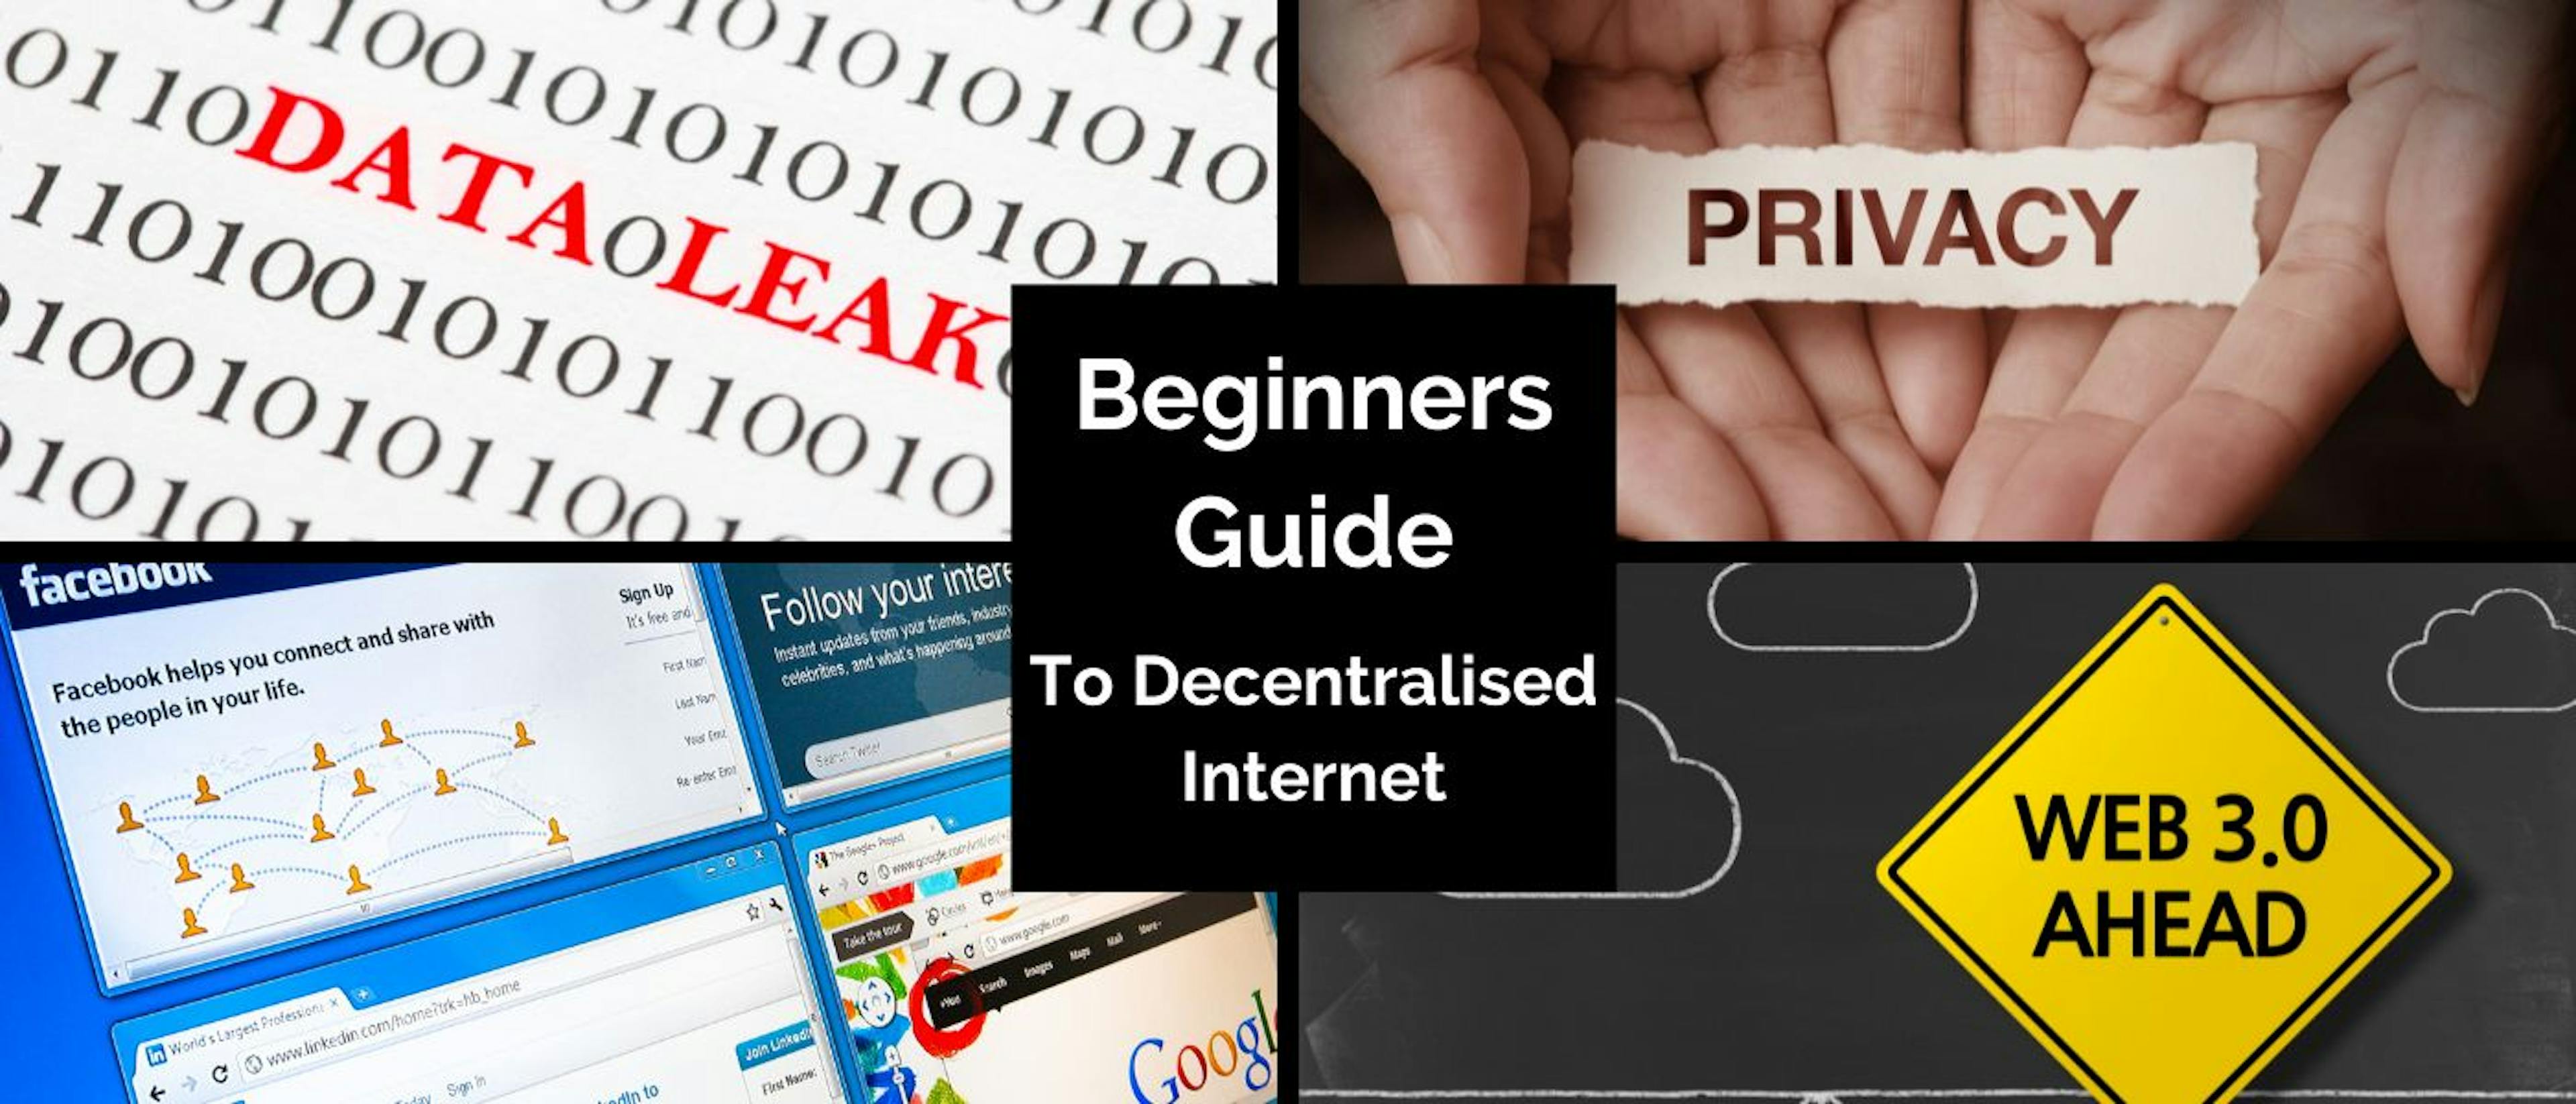 featured image - A Beginners Guide to Decentralized Internet